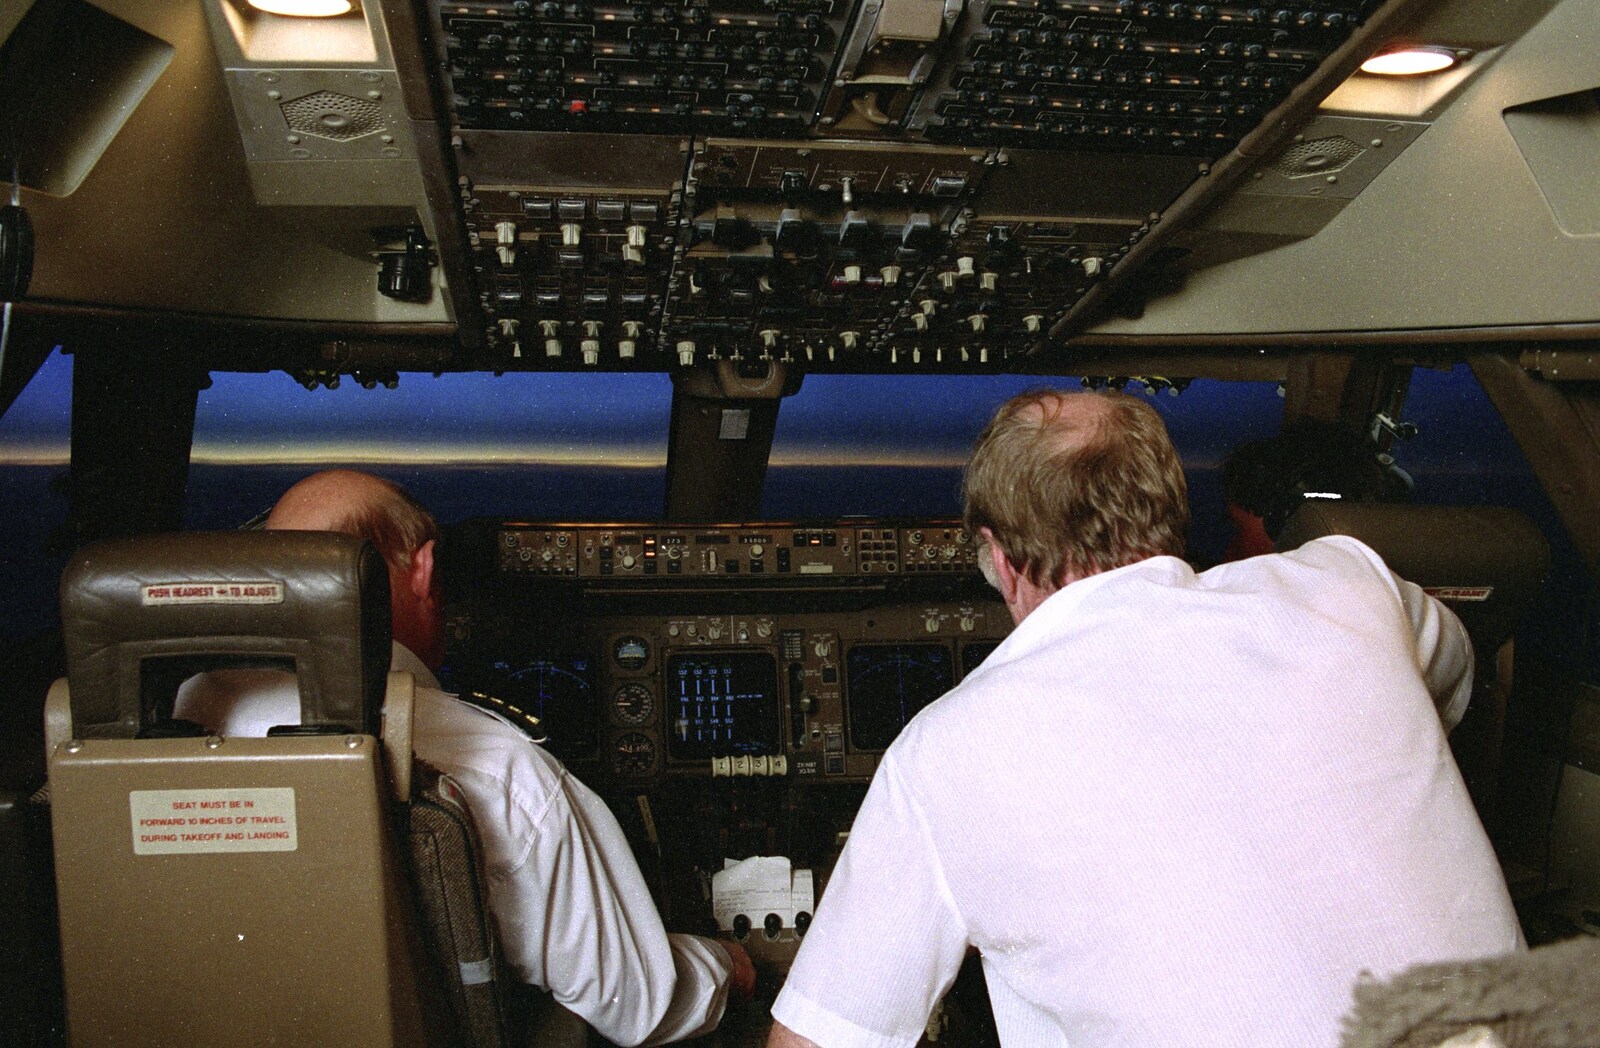 More flying in a 747 cockpit from A 747 Cockpit, Honolulu and Pearl Harbor, O'ahu, Hawai'i, United States - 20th November 1992